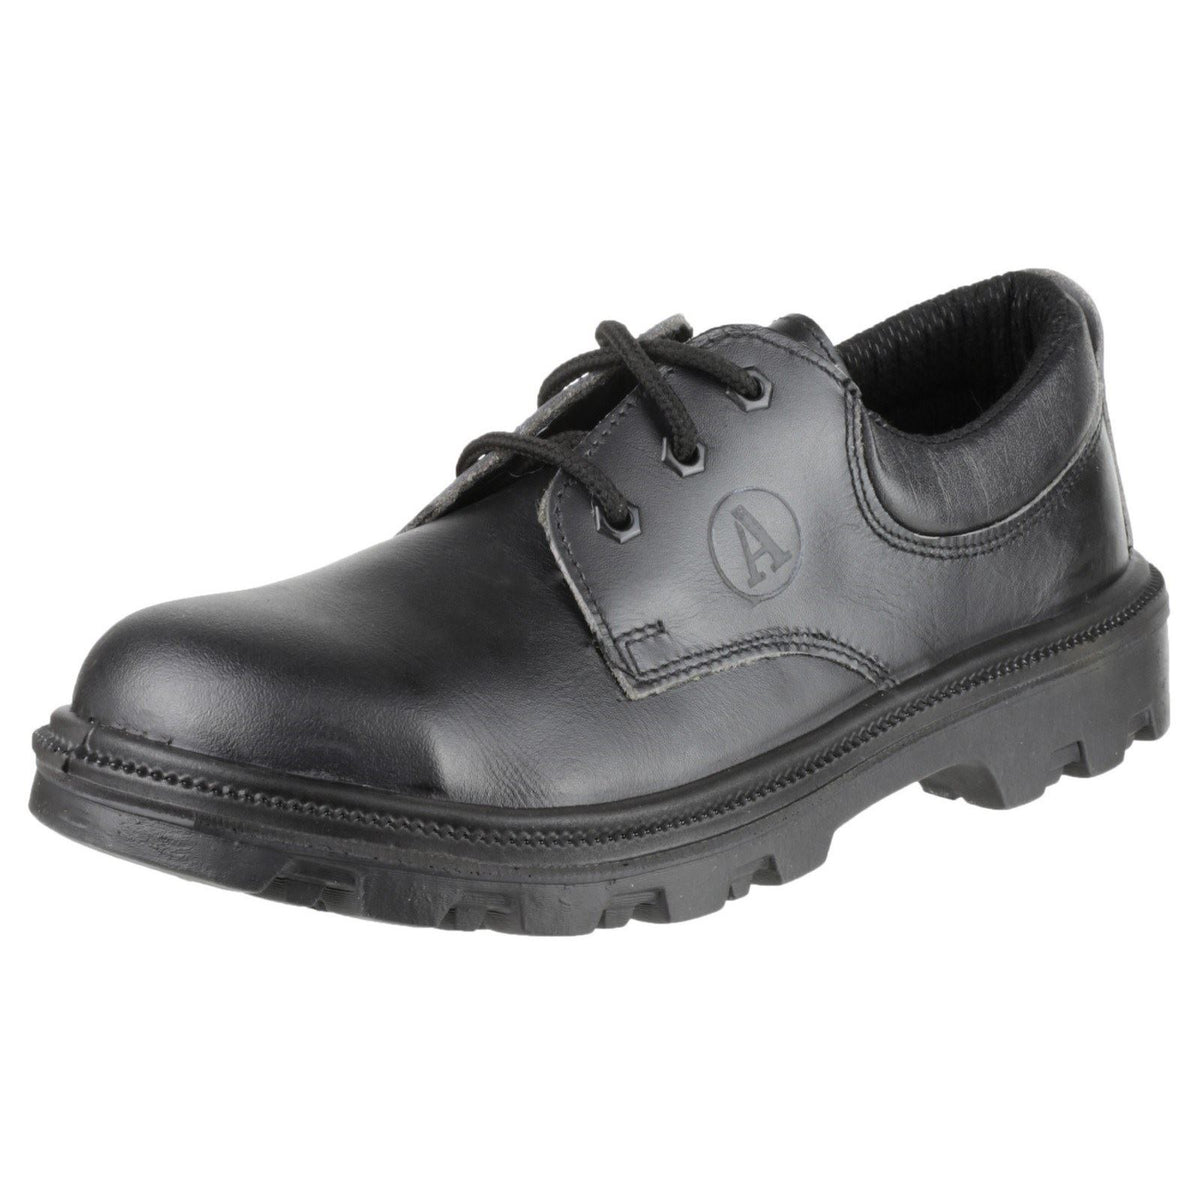 Amblers Safety FS133 Lace up Safety Shoes